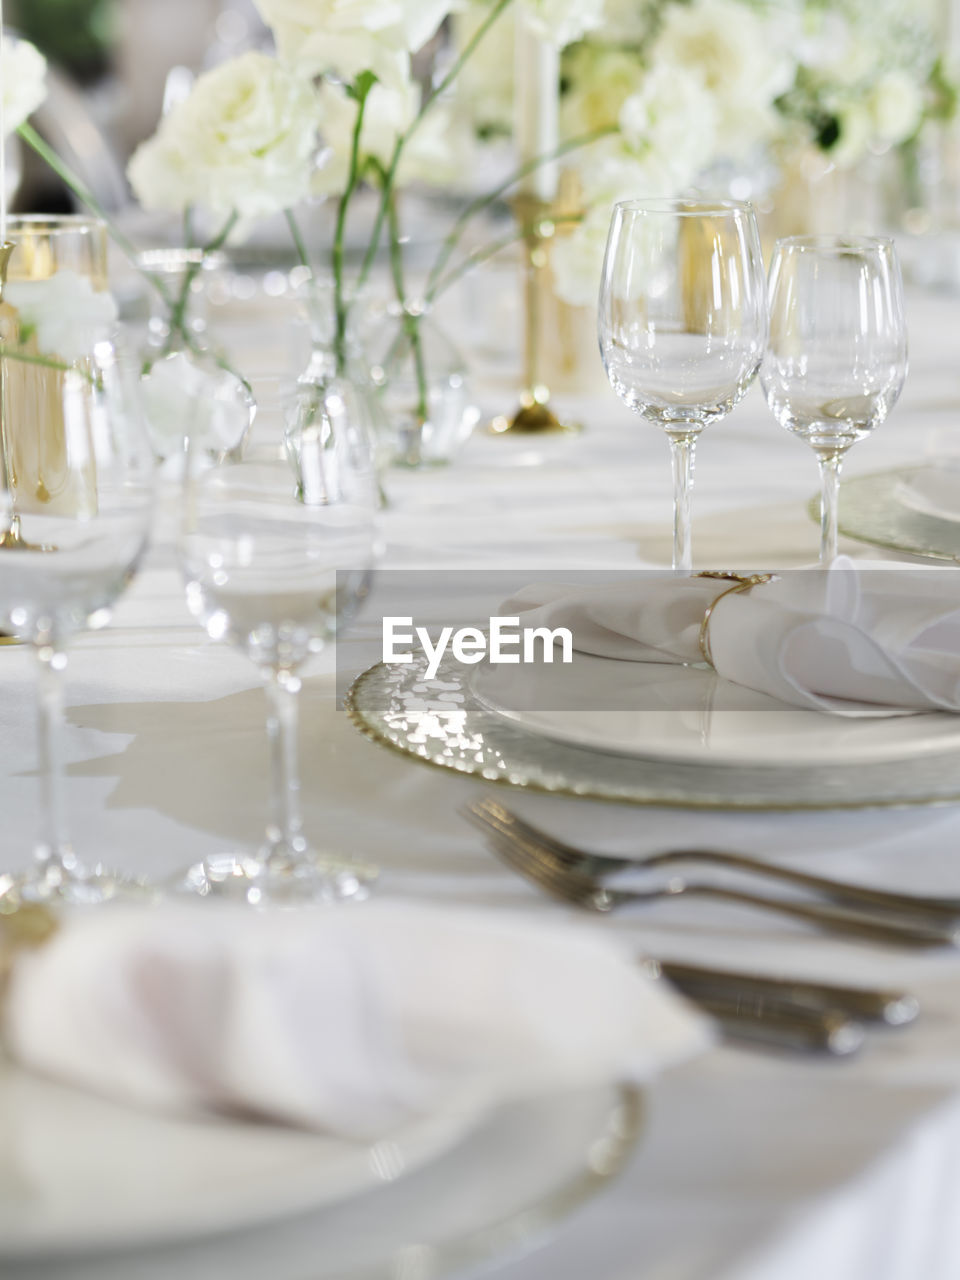 Table serves for banquet. transparent wine glasses, plates and shiny cutlery on white table cloth.